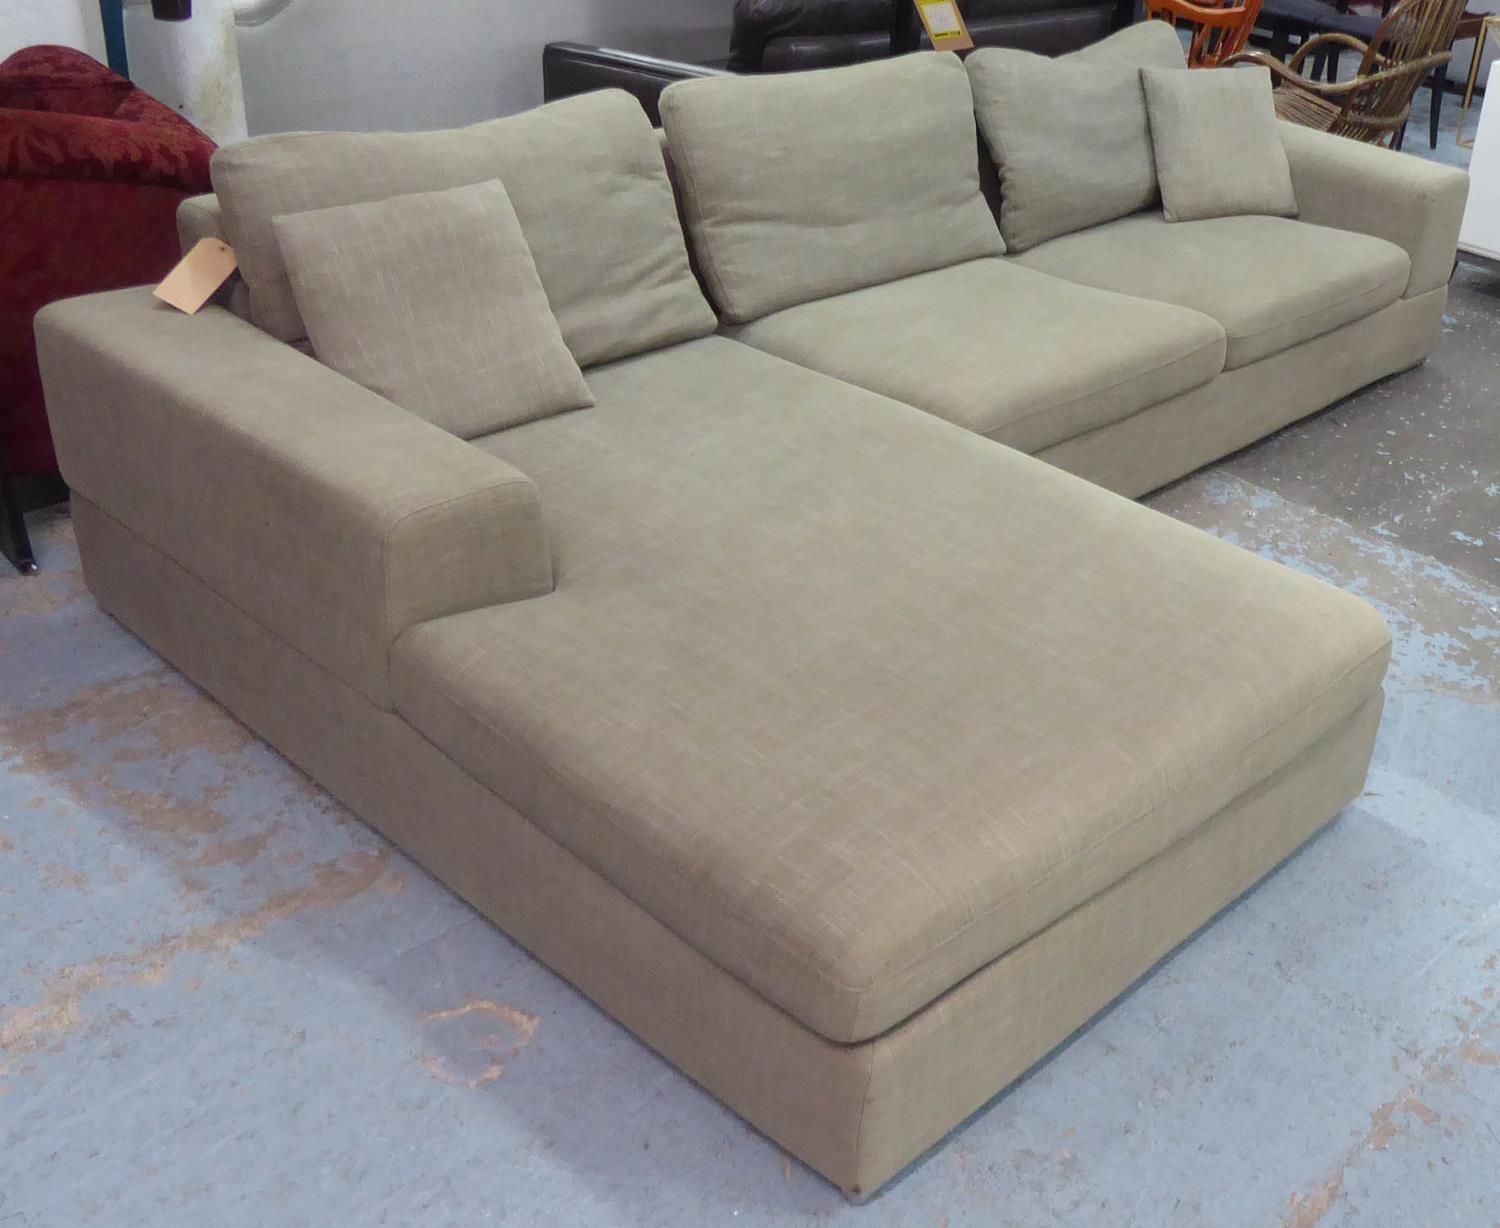 DWELL VERONA CORNER SOFA, in two sections, 315cm x 177cm. (with faults)